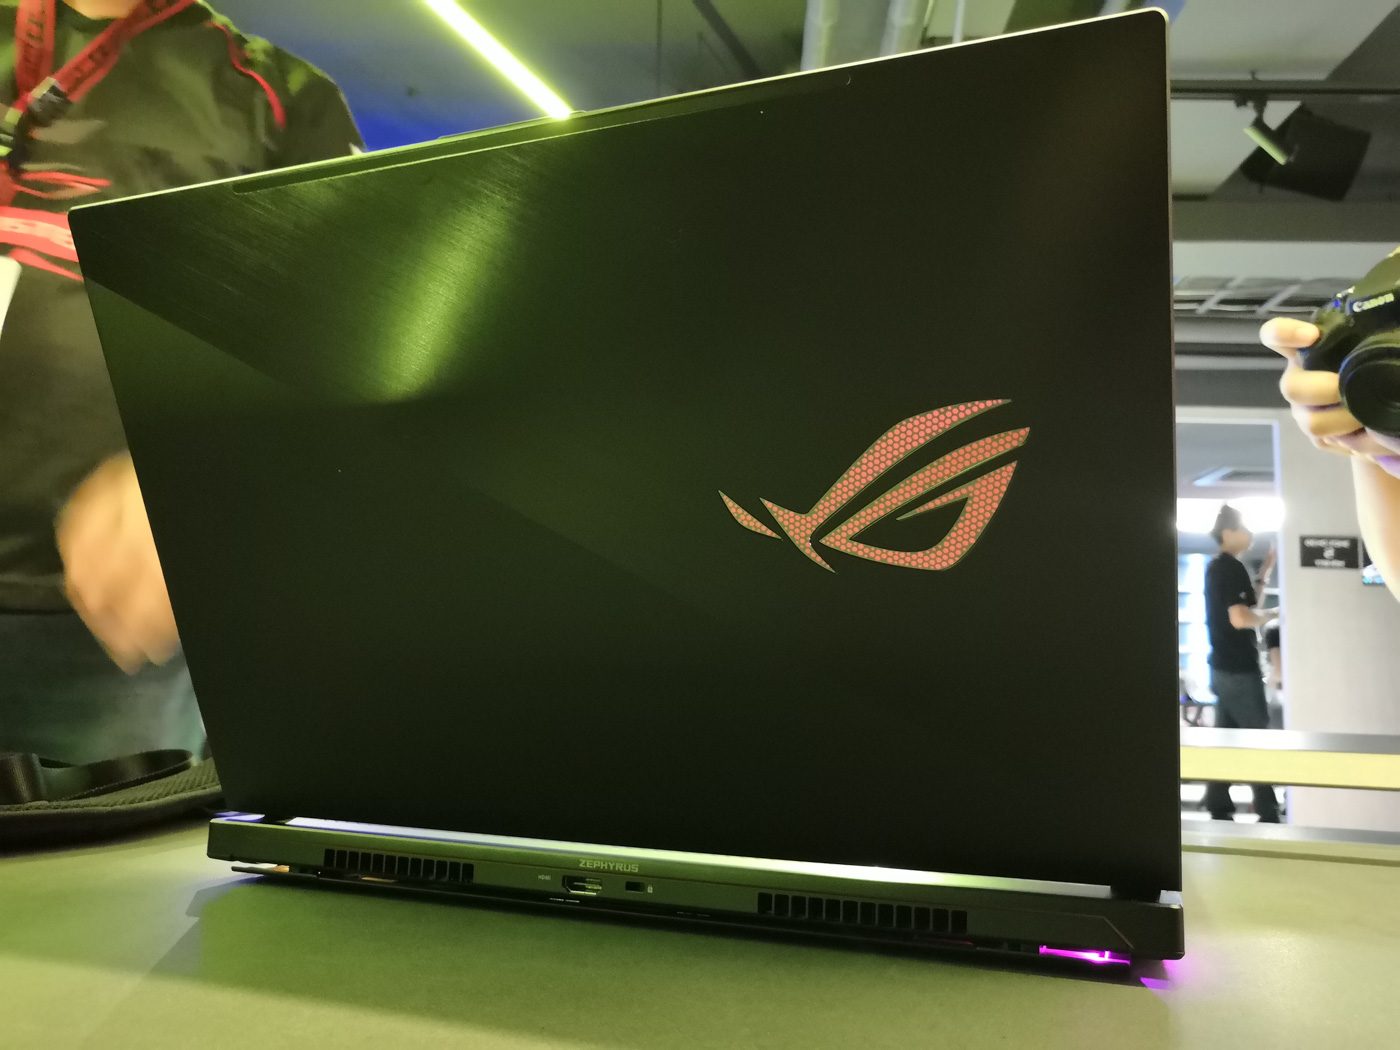 Asus showcases thinnest ROG gaming laptop